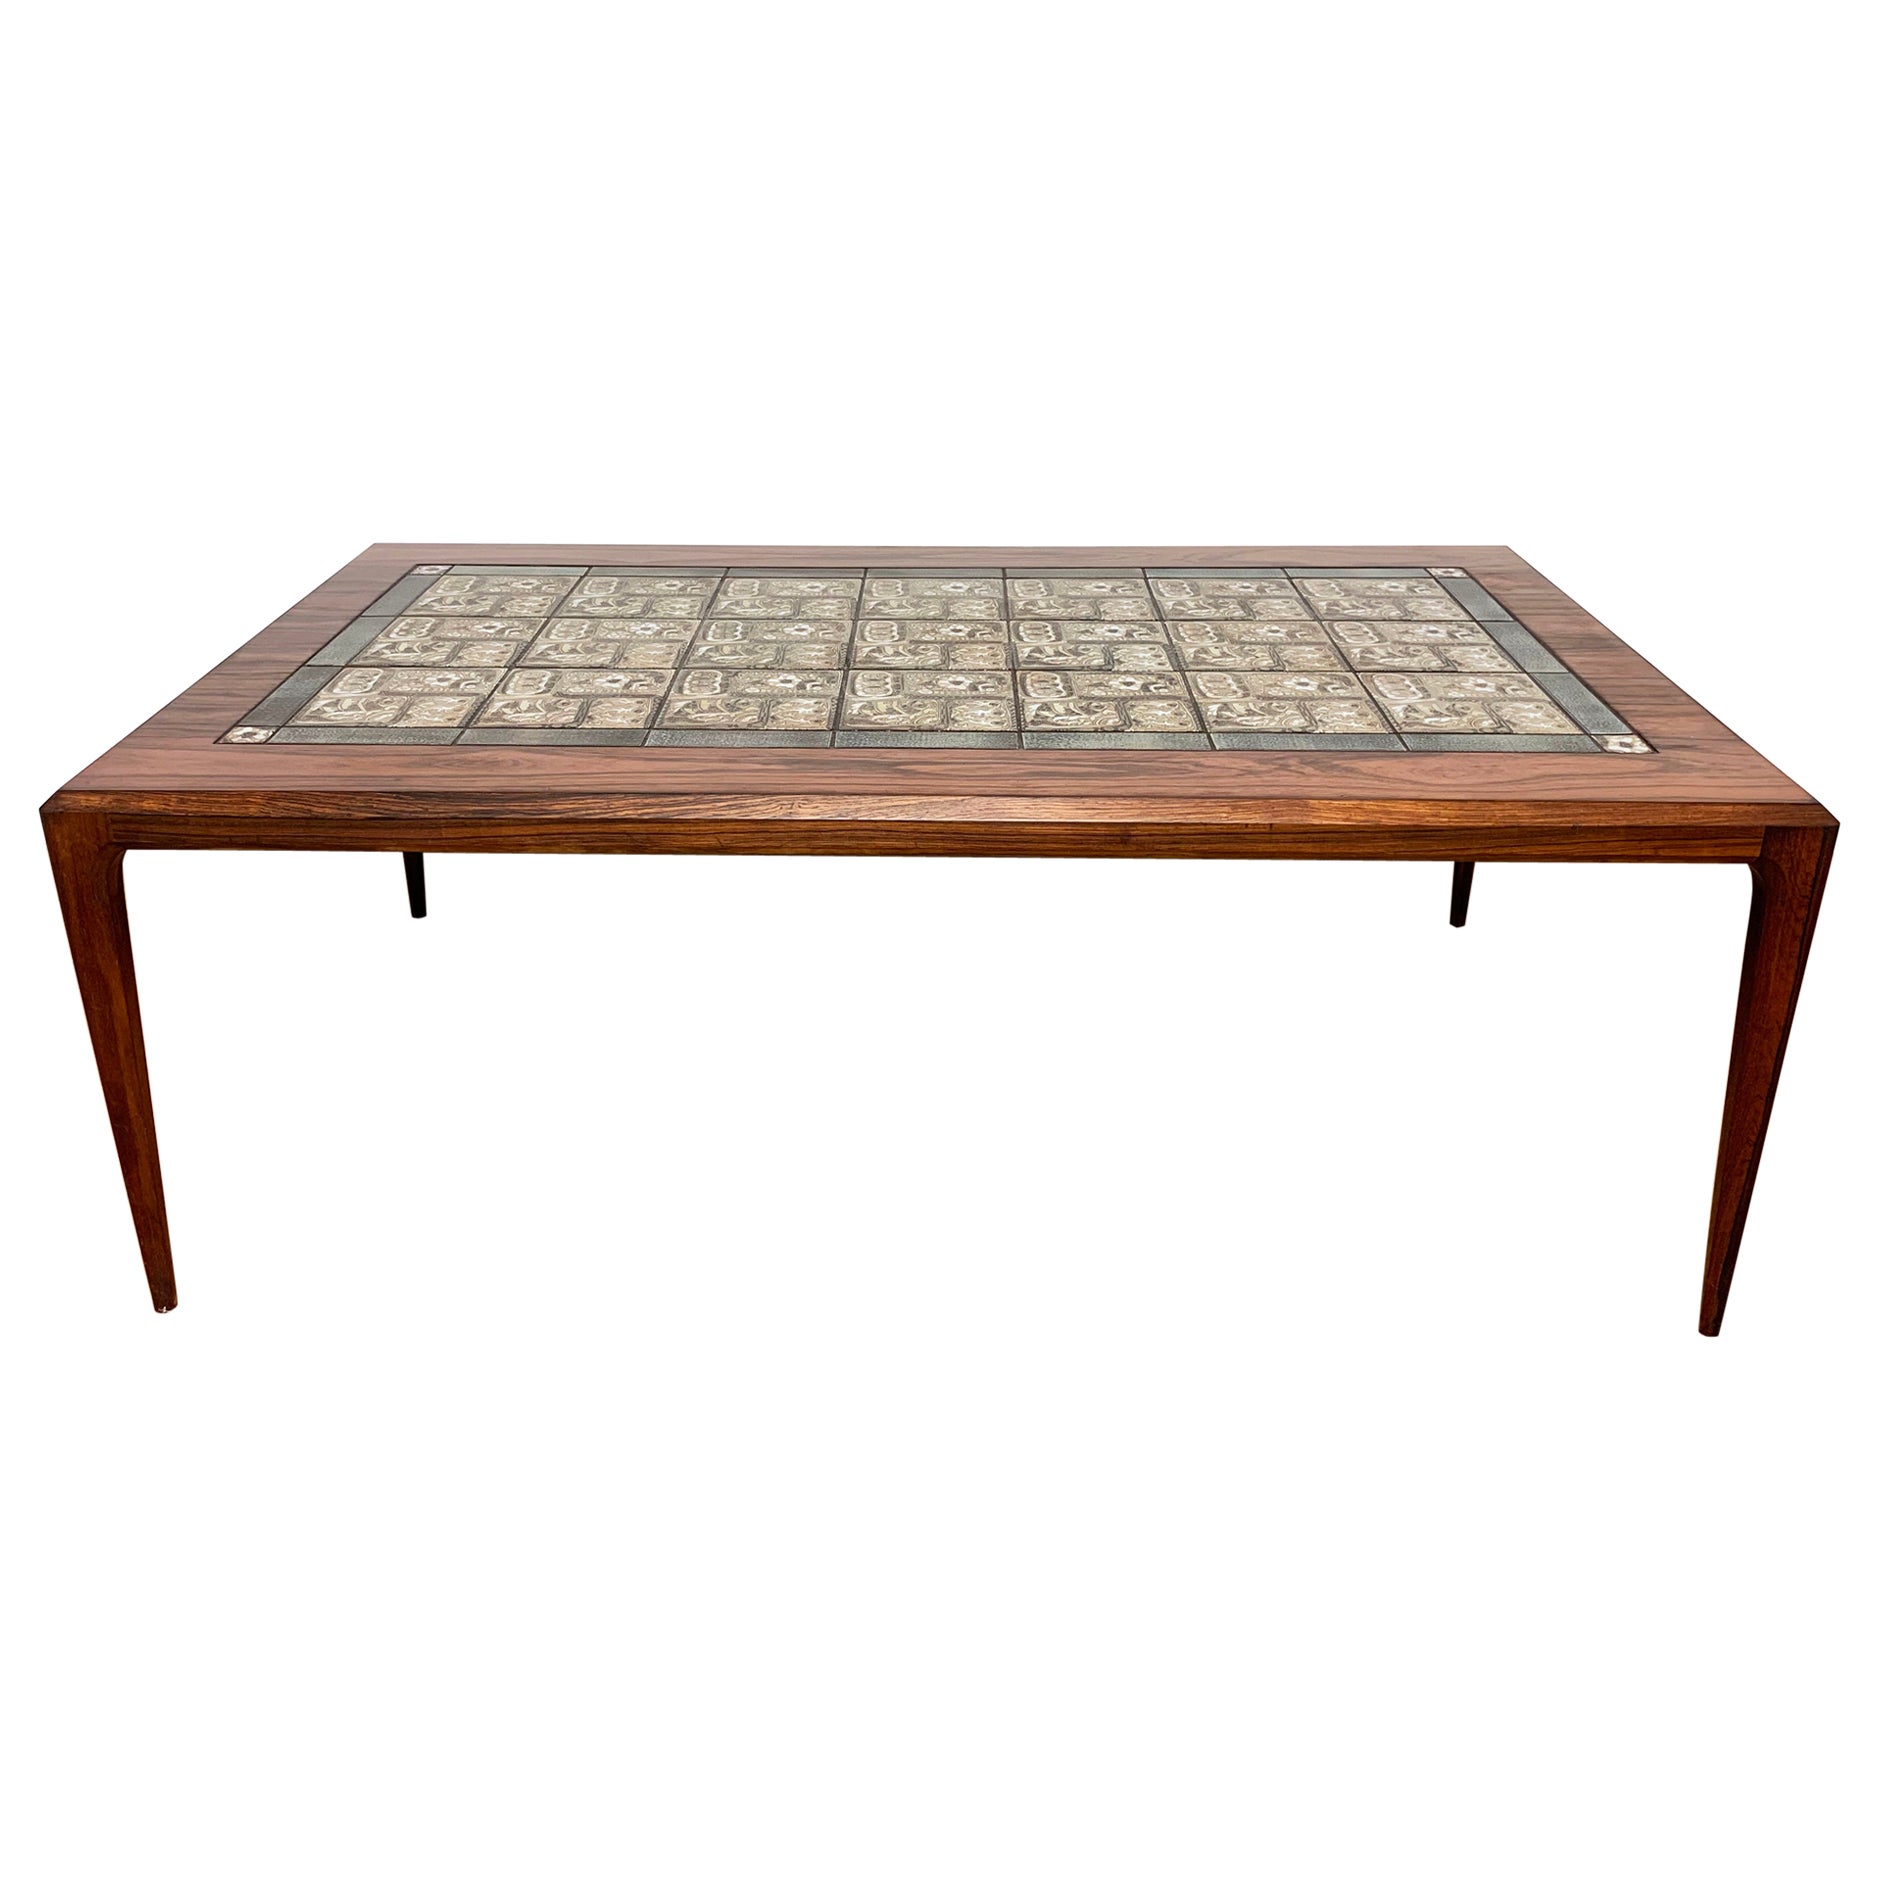 Johannes Andersen Rosewood Coffee Table with Thorsson Royal Copenhagen Tiles